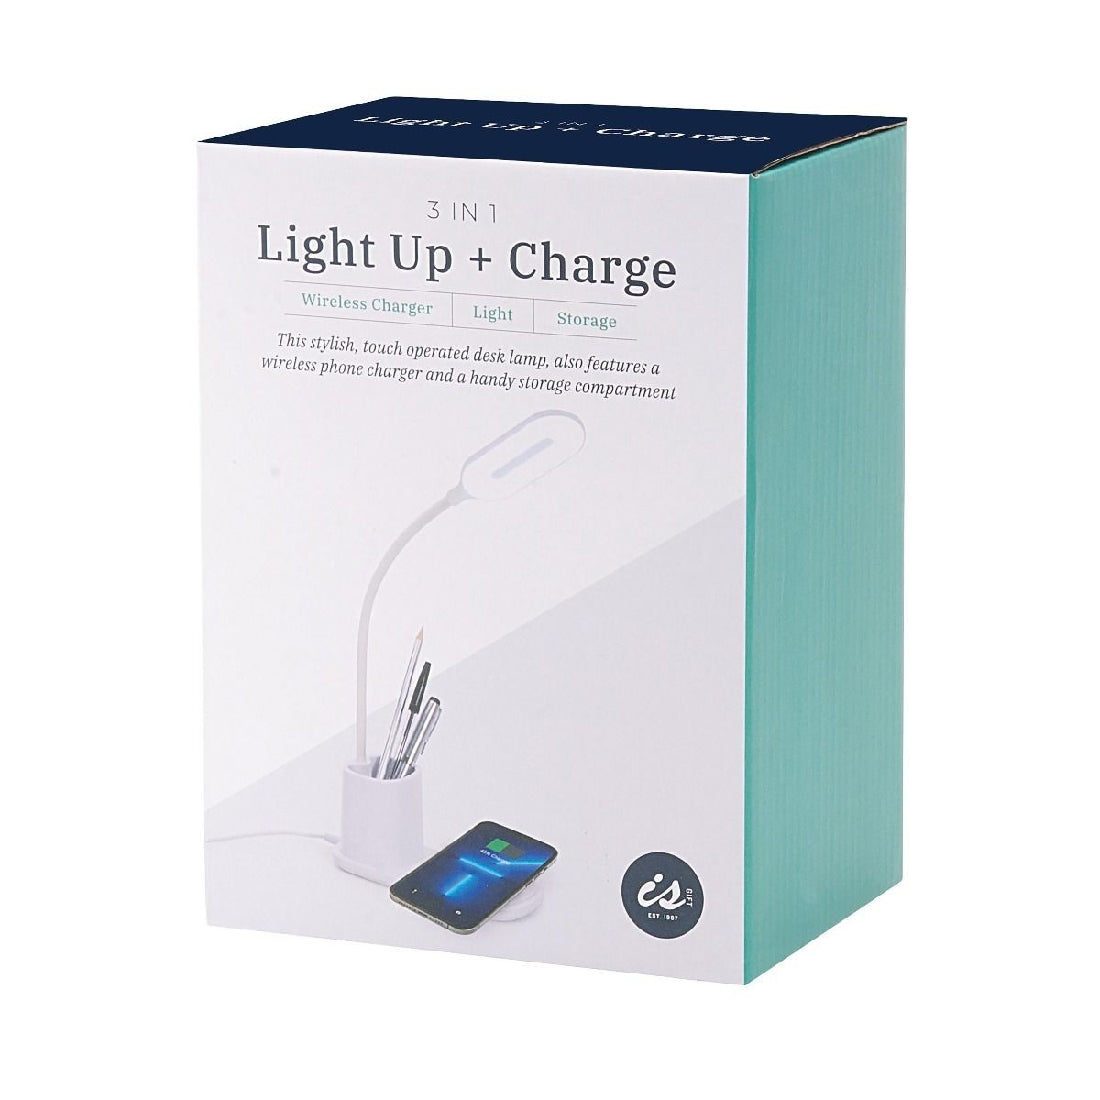 Isalbi 3 In 1 Light Up & Charge